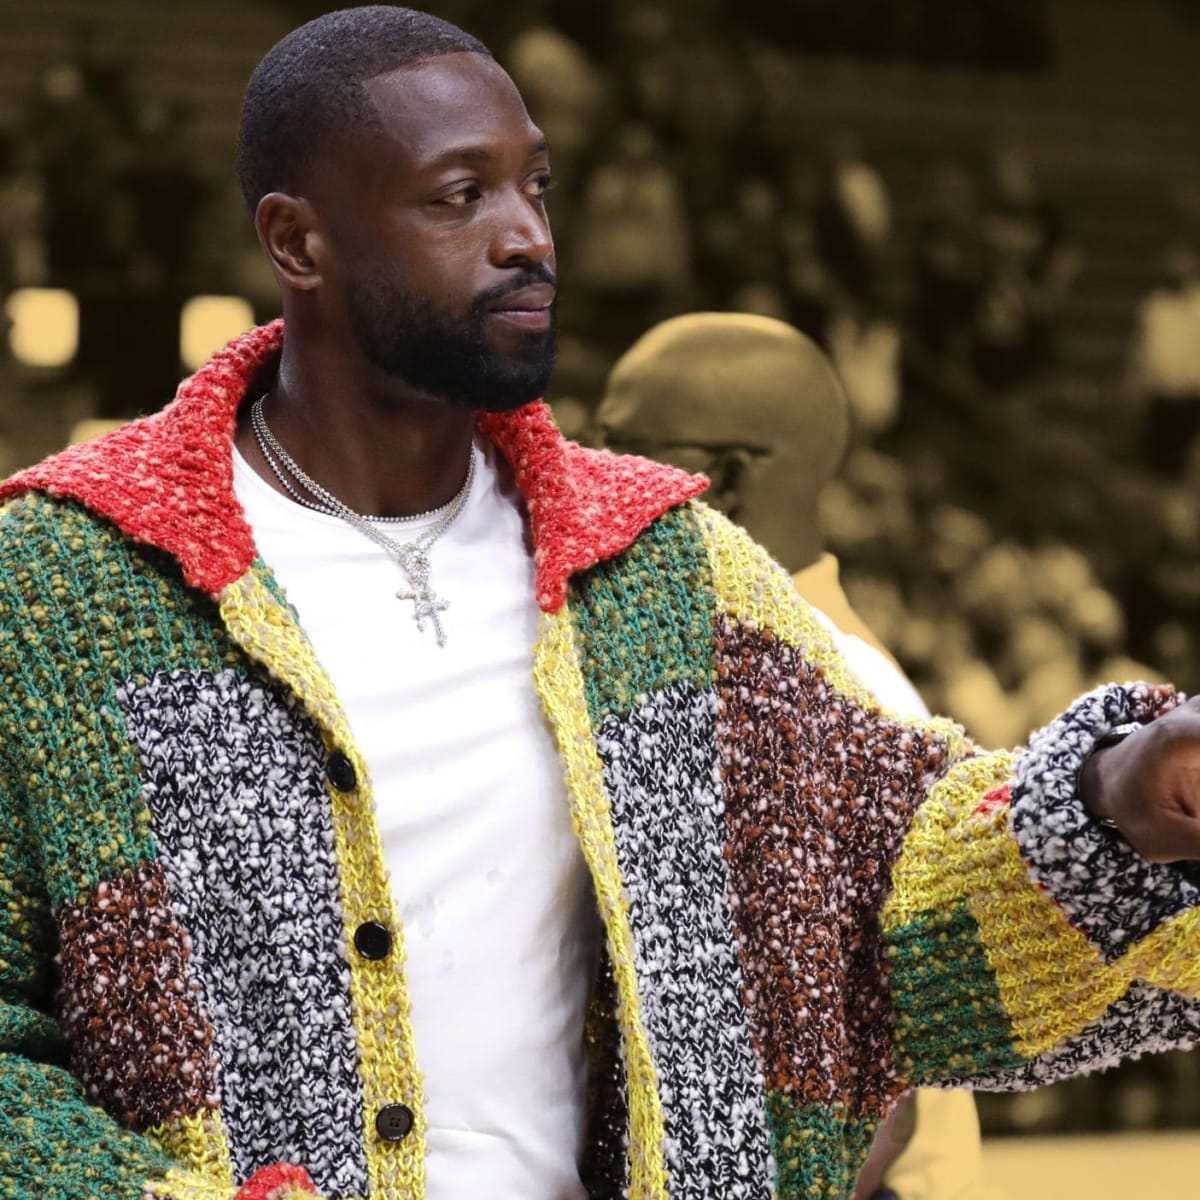 Dwyane Wade says he used to wear heels and dress like a girl when